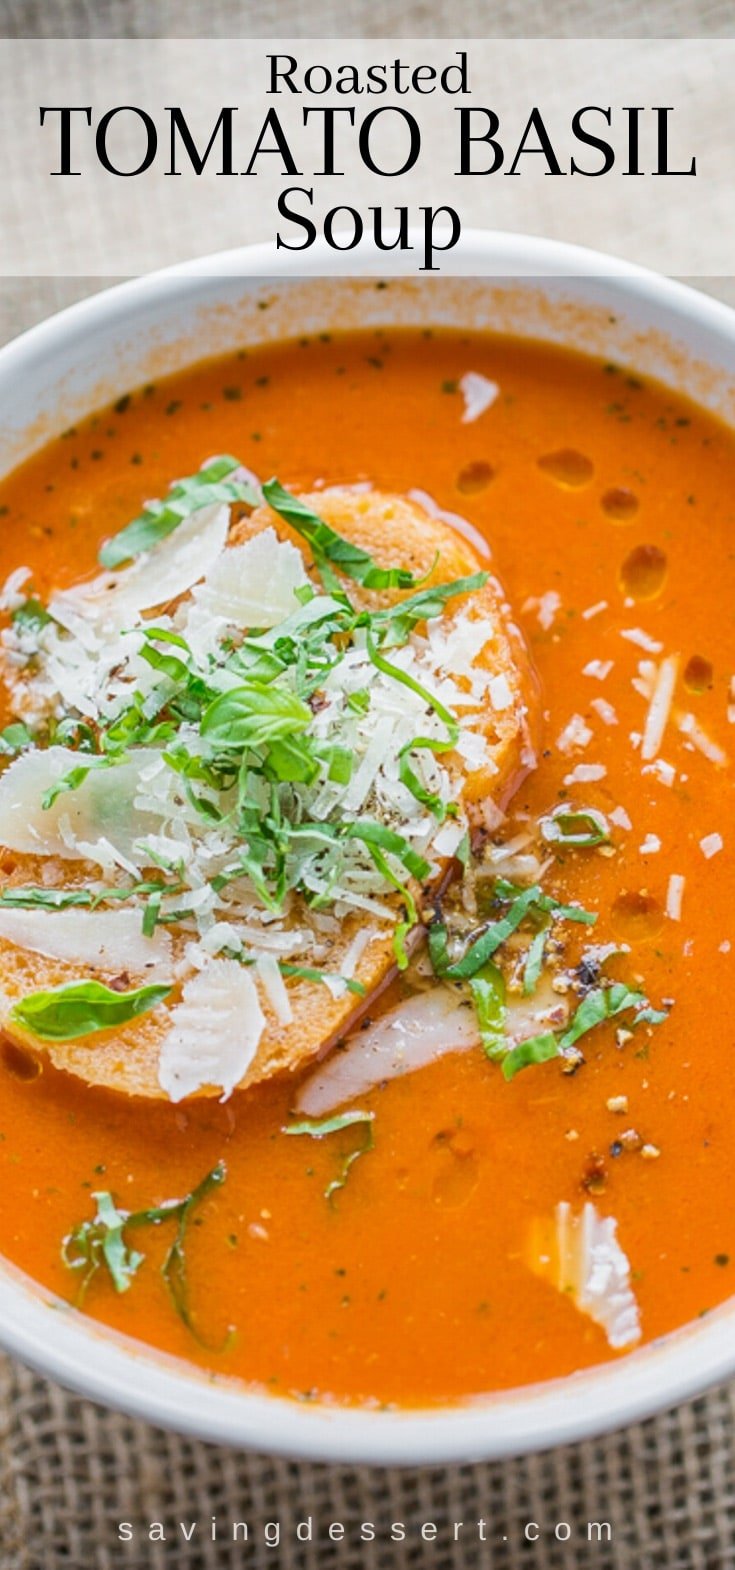 A bowl of roasted tomato basil soup with a slice of bread on top